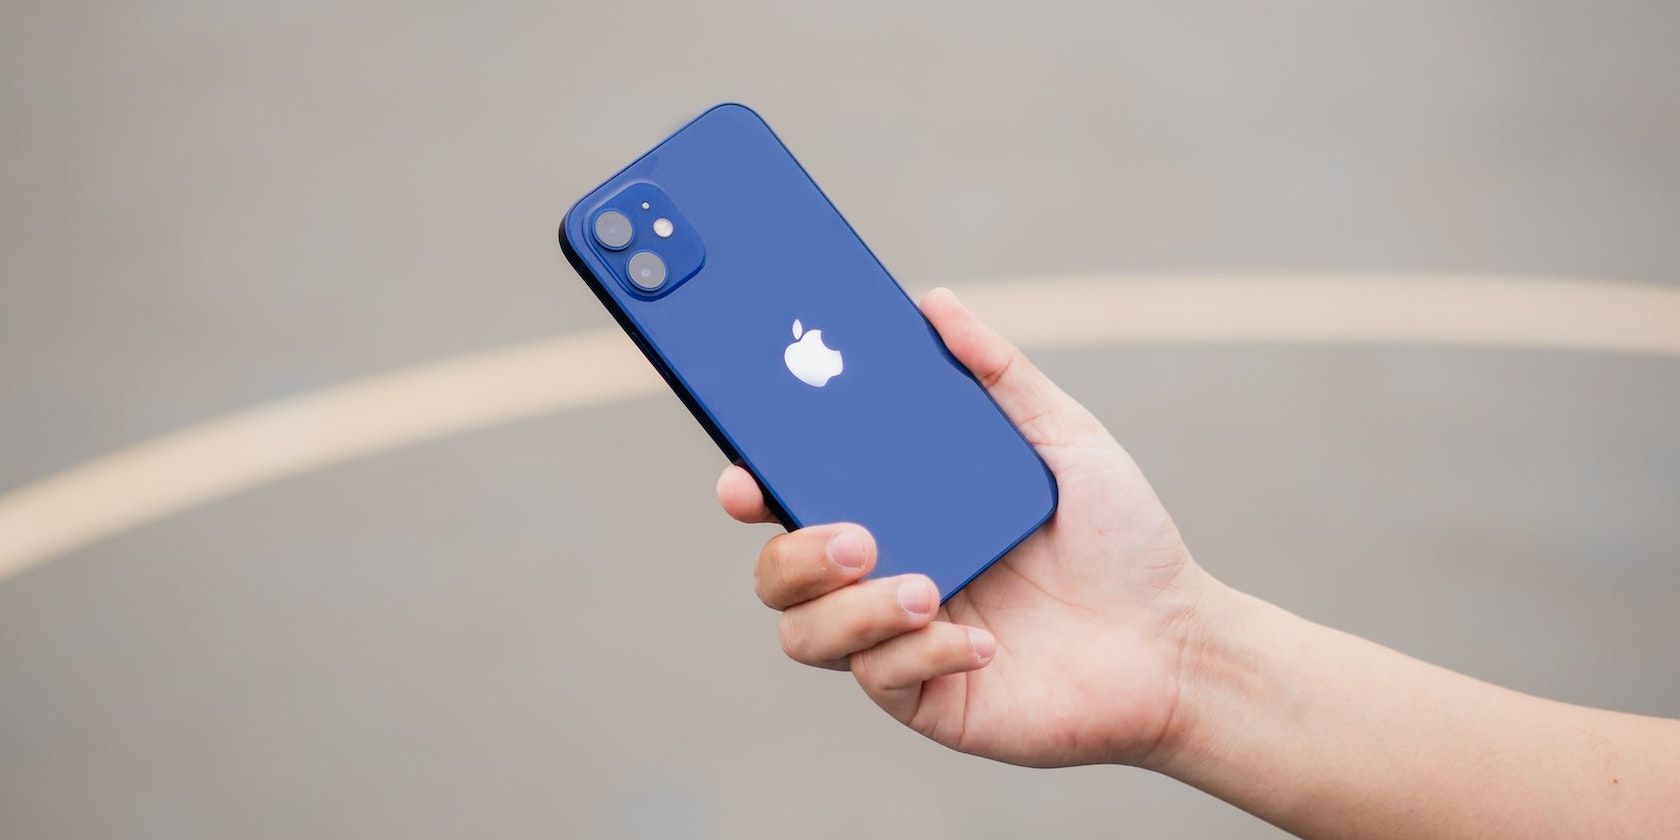 A hand holding a blue iPhone/